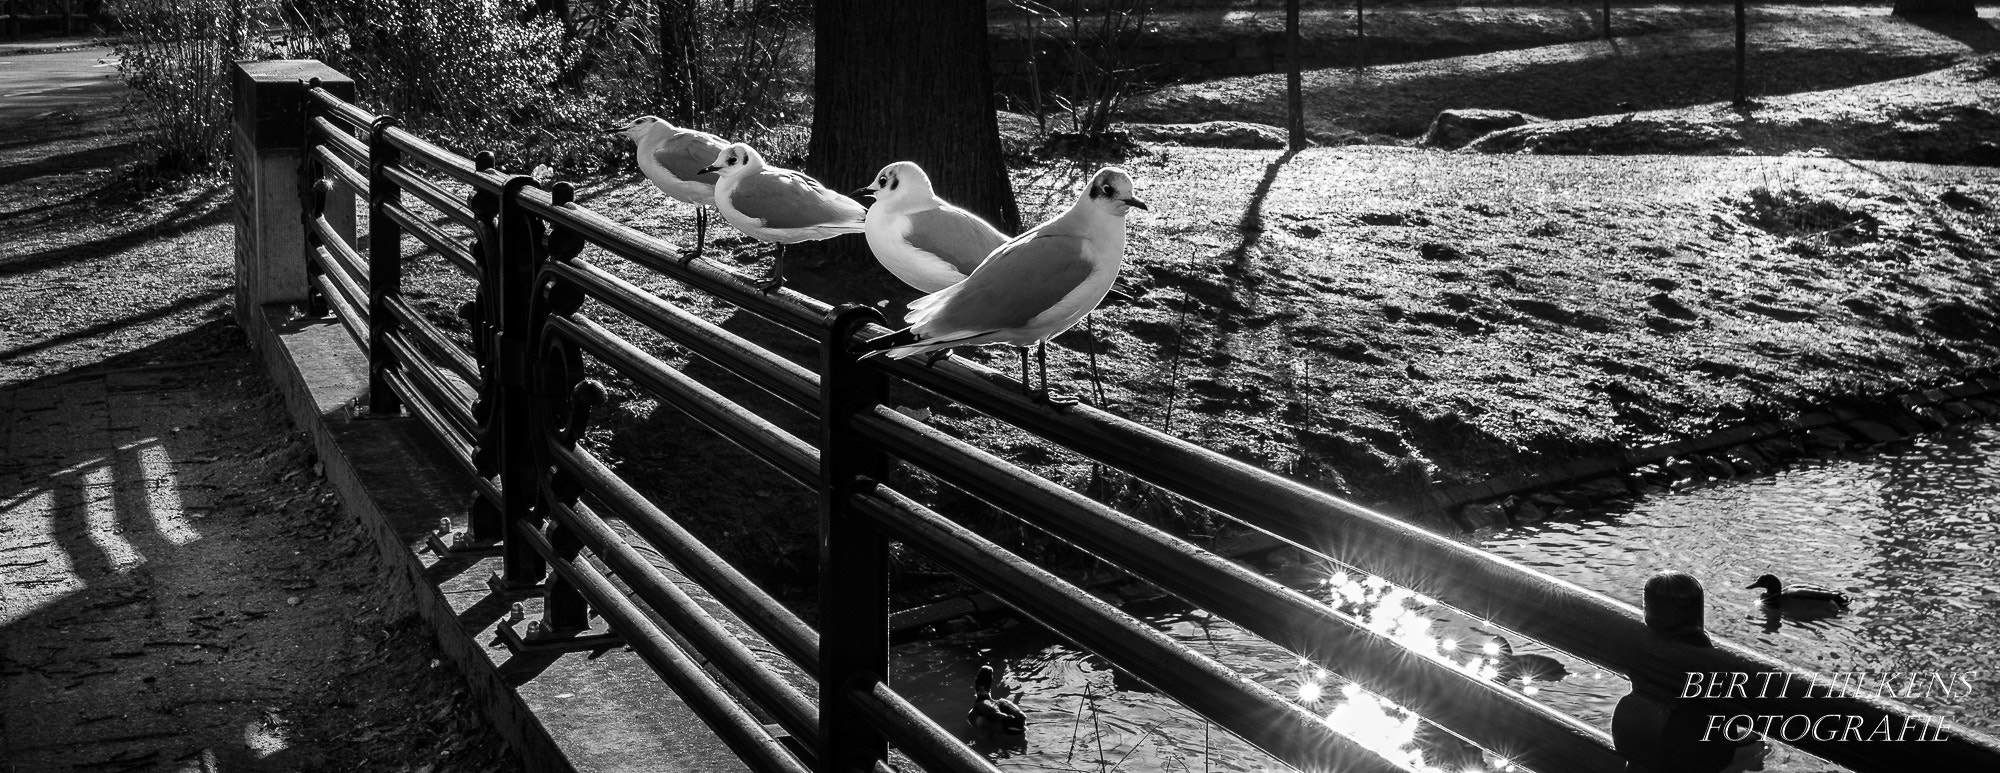 Nikon D7100 sample photo. Birds in black and white photography